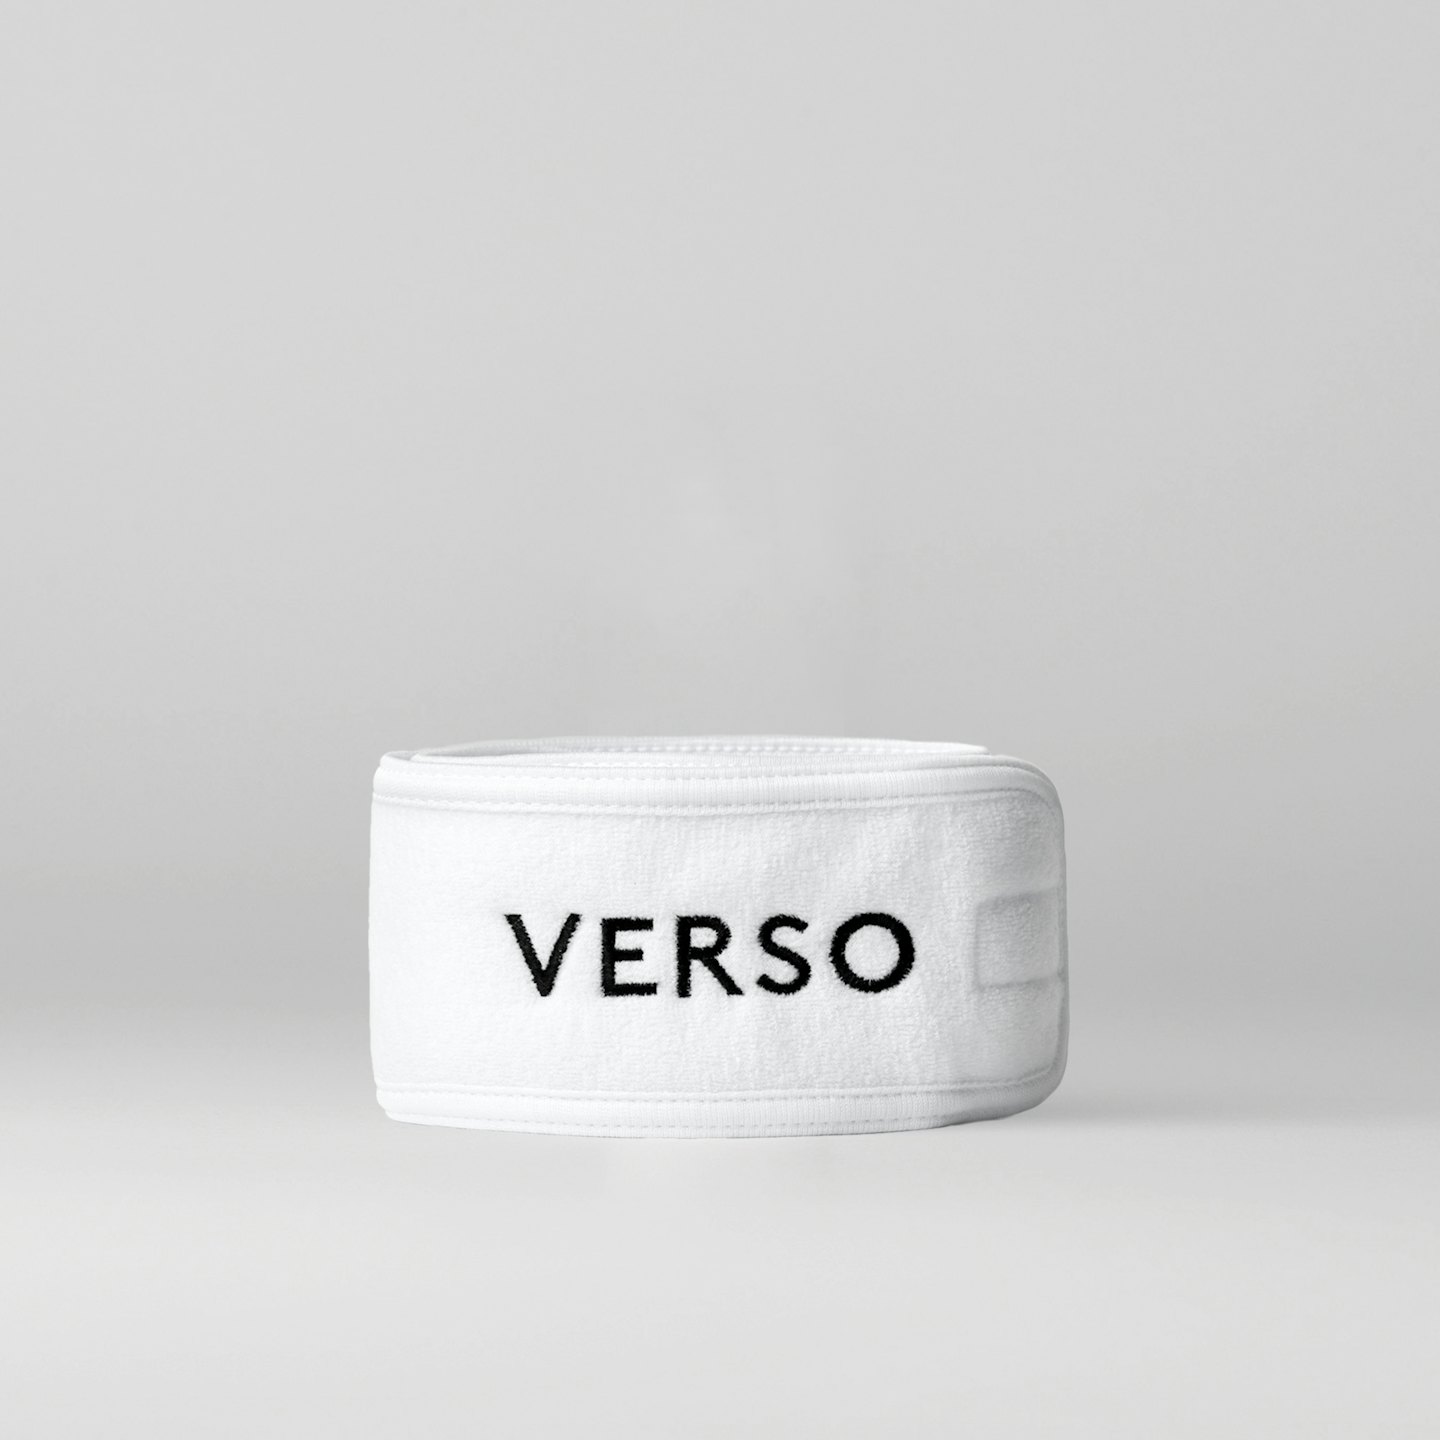 Verso Eye Care Discovery Kit